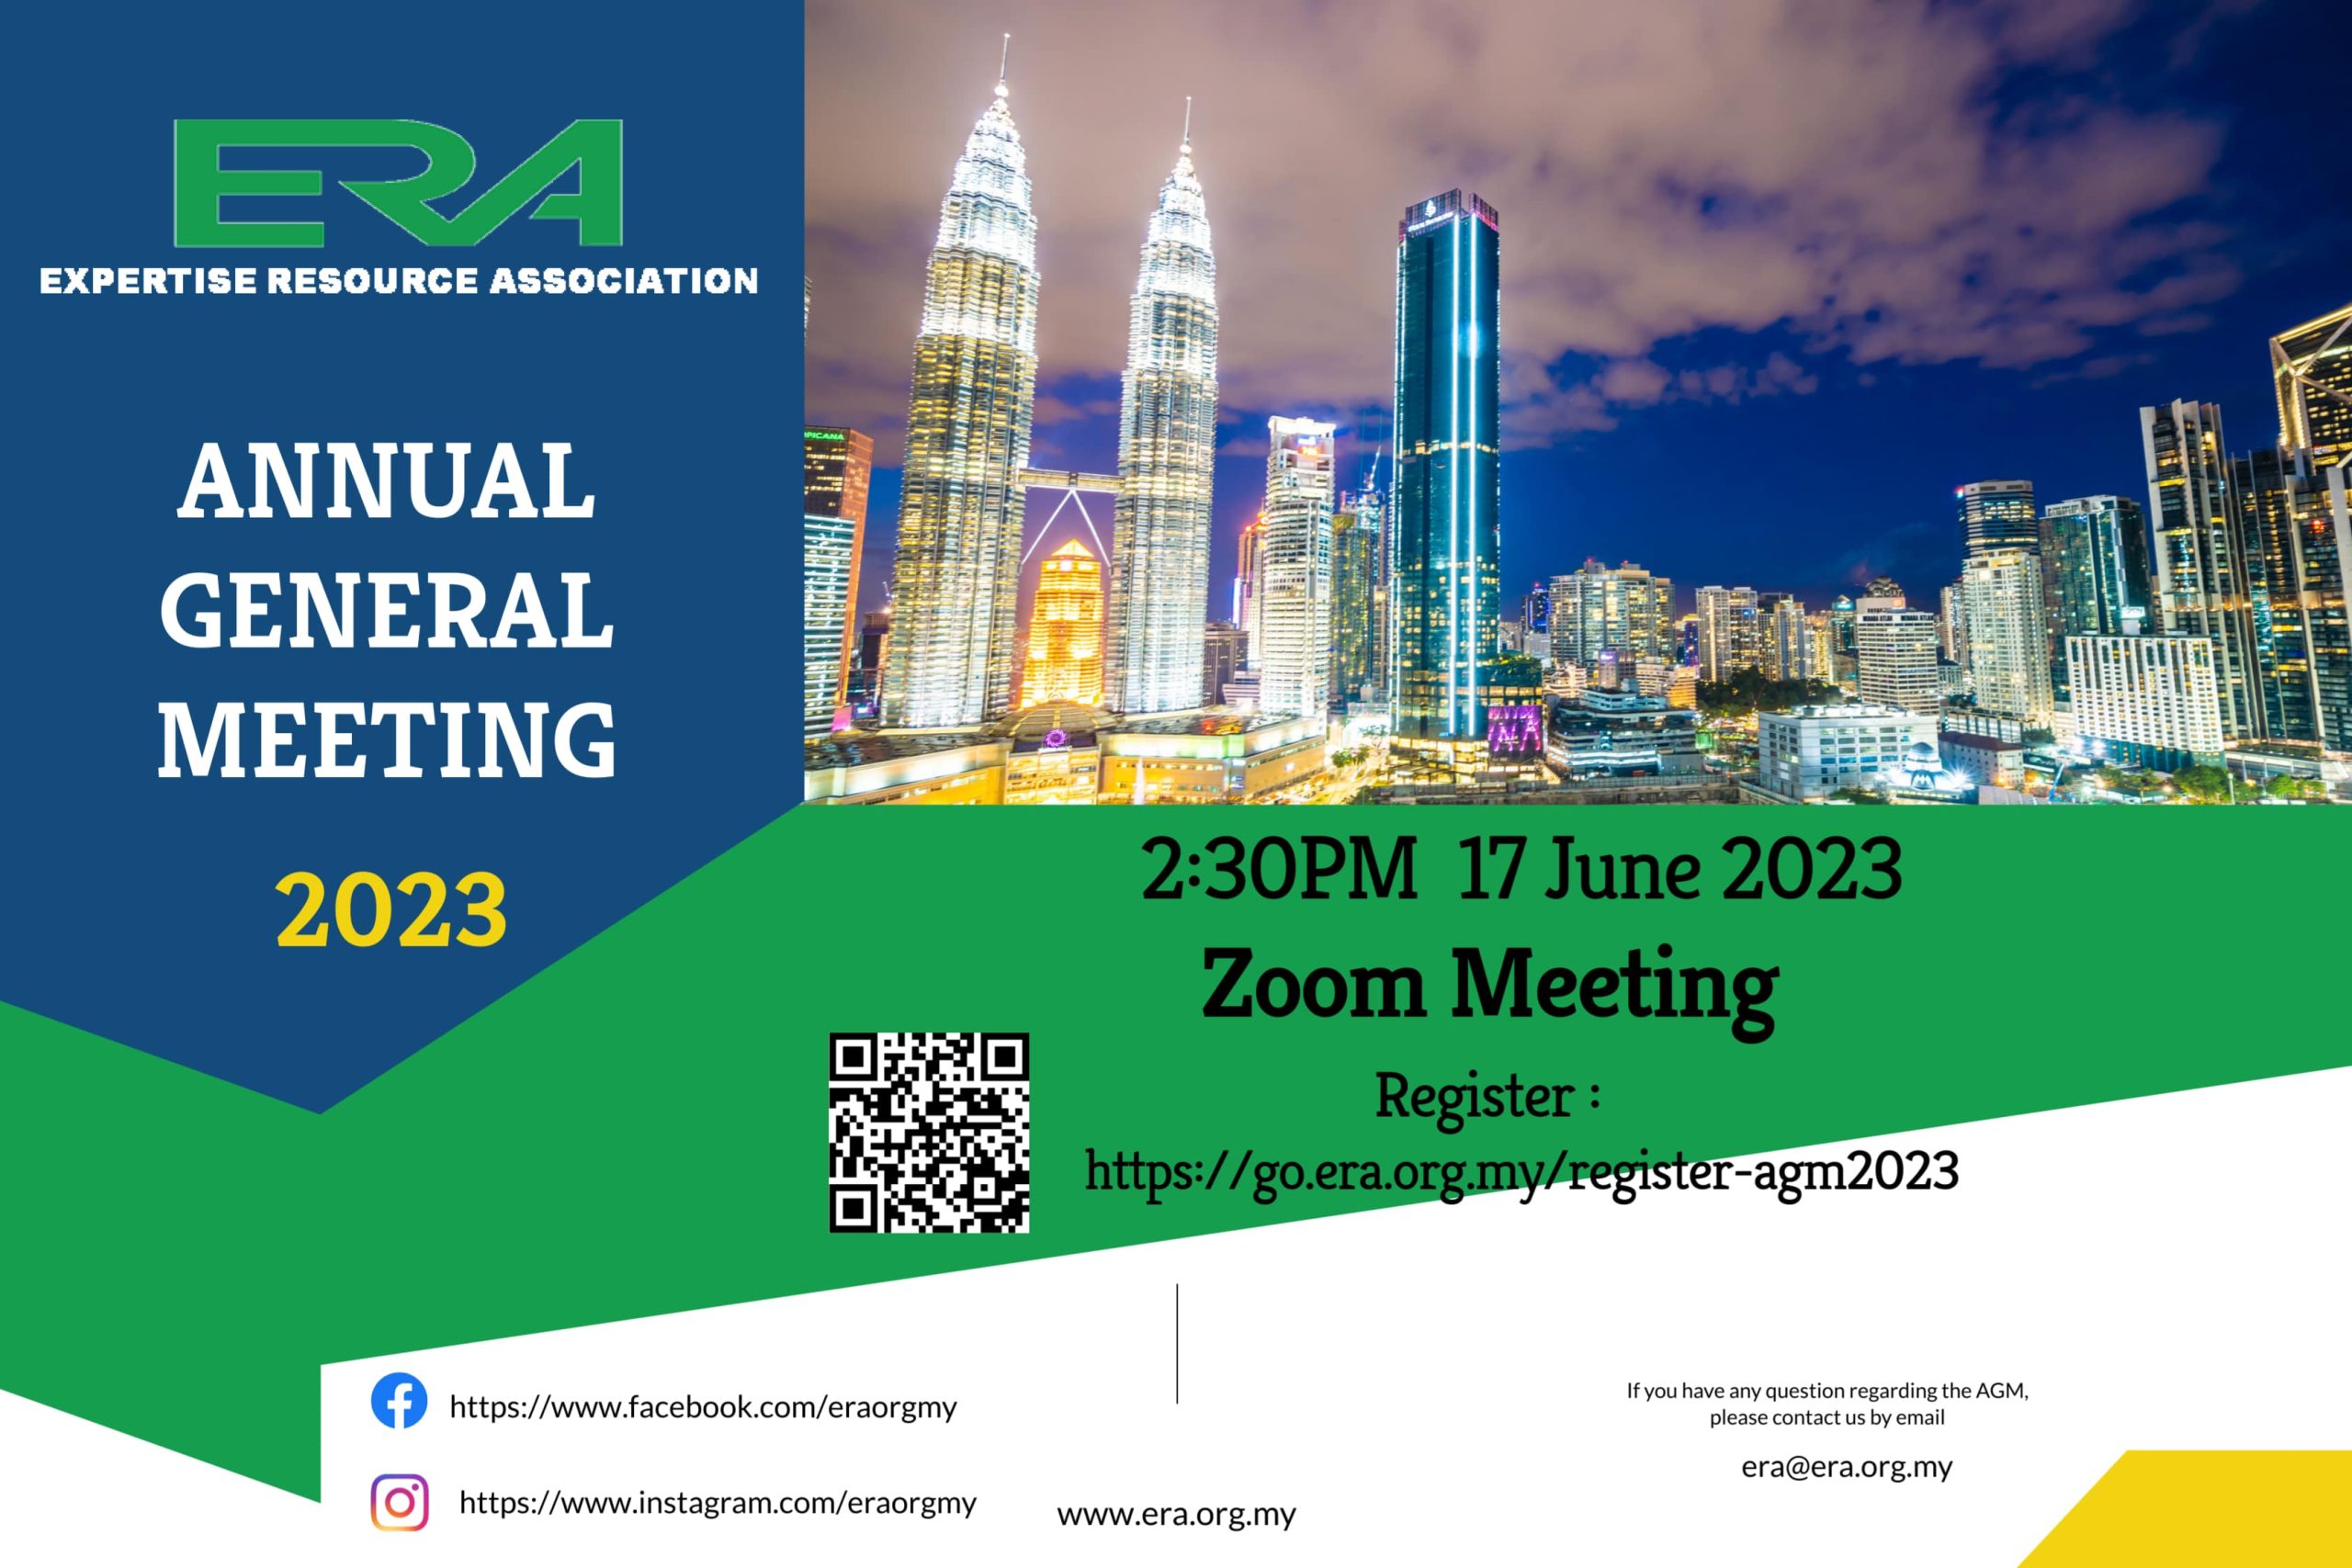 Expertise Resource Association AGM 2023